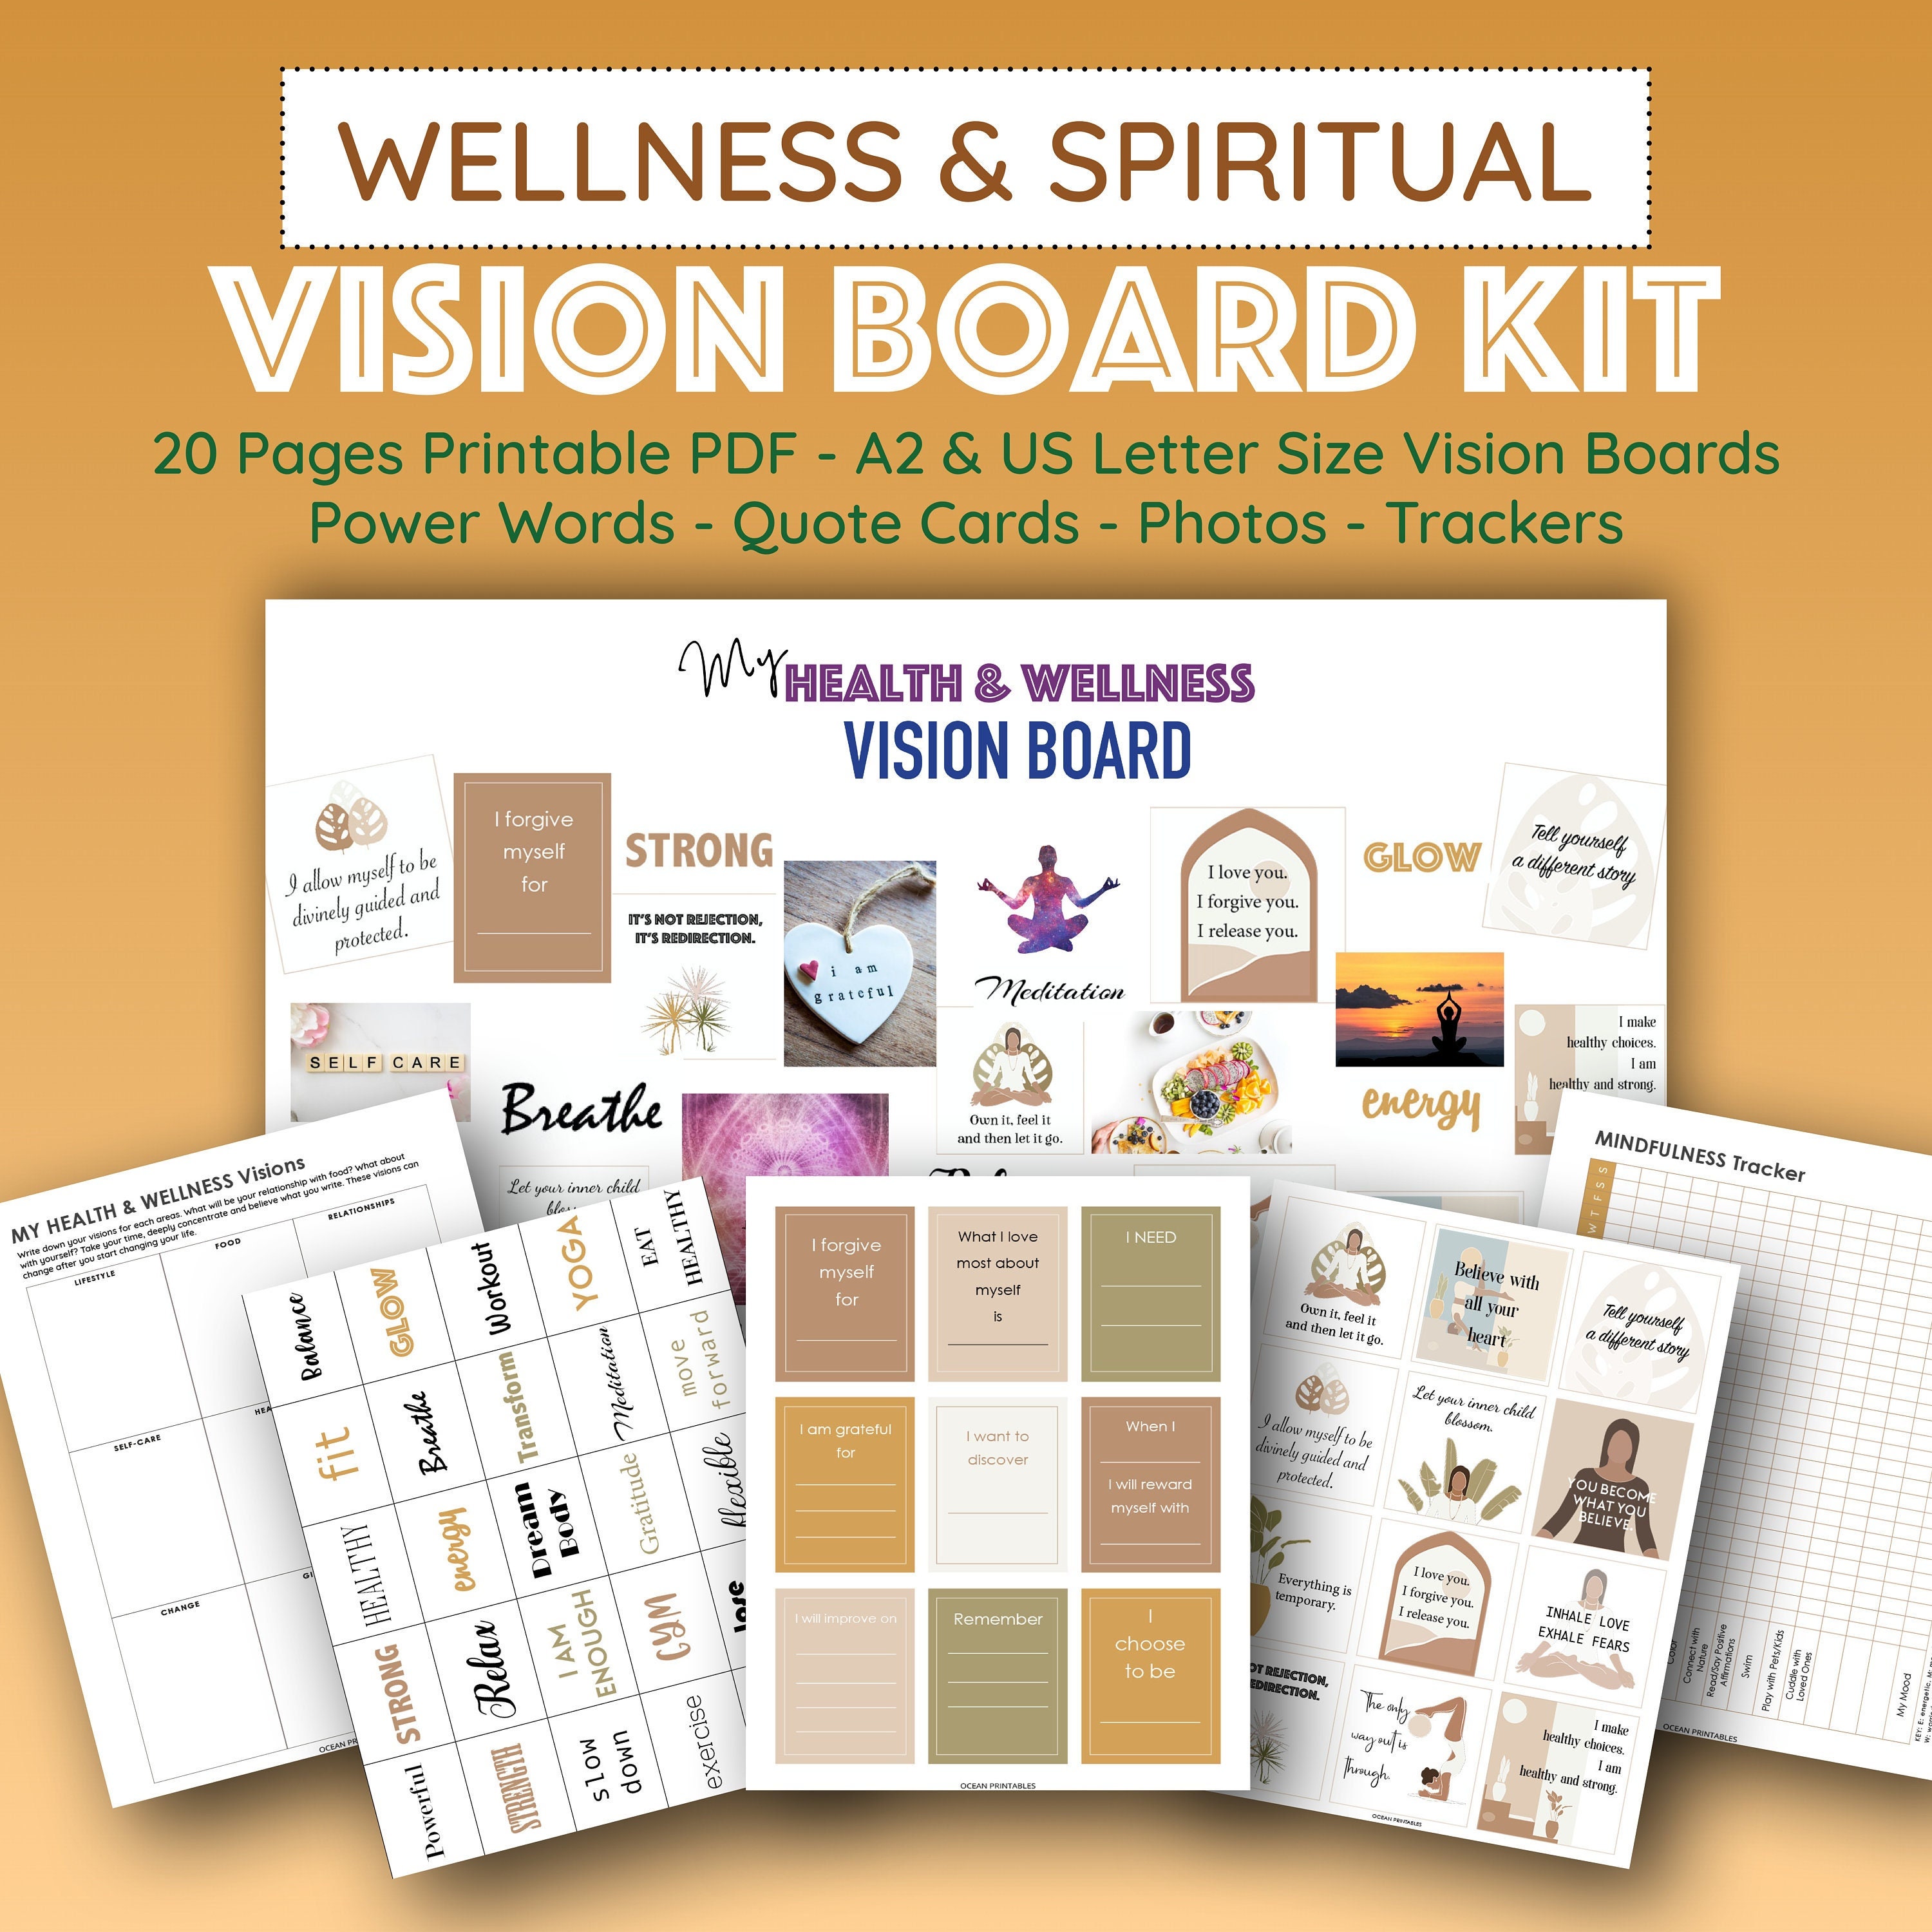 Wellness Wednesday: The Value of Vision Boards